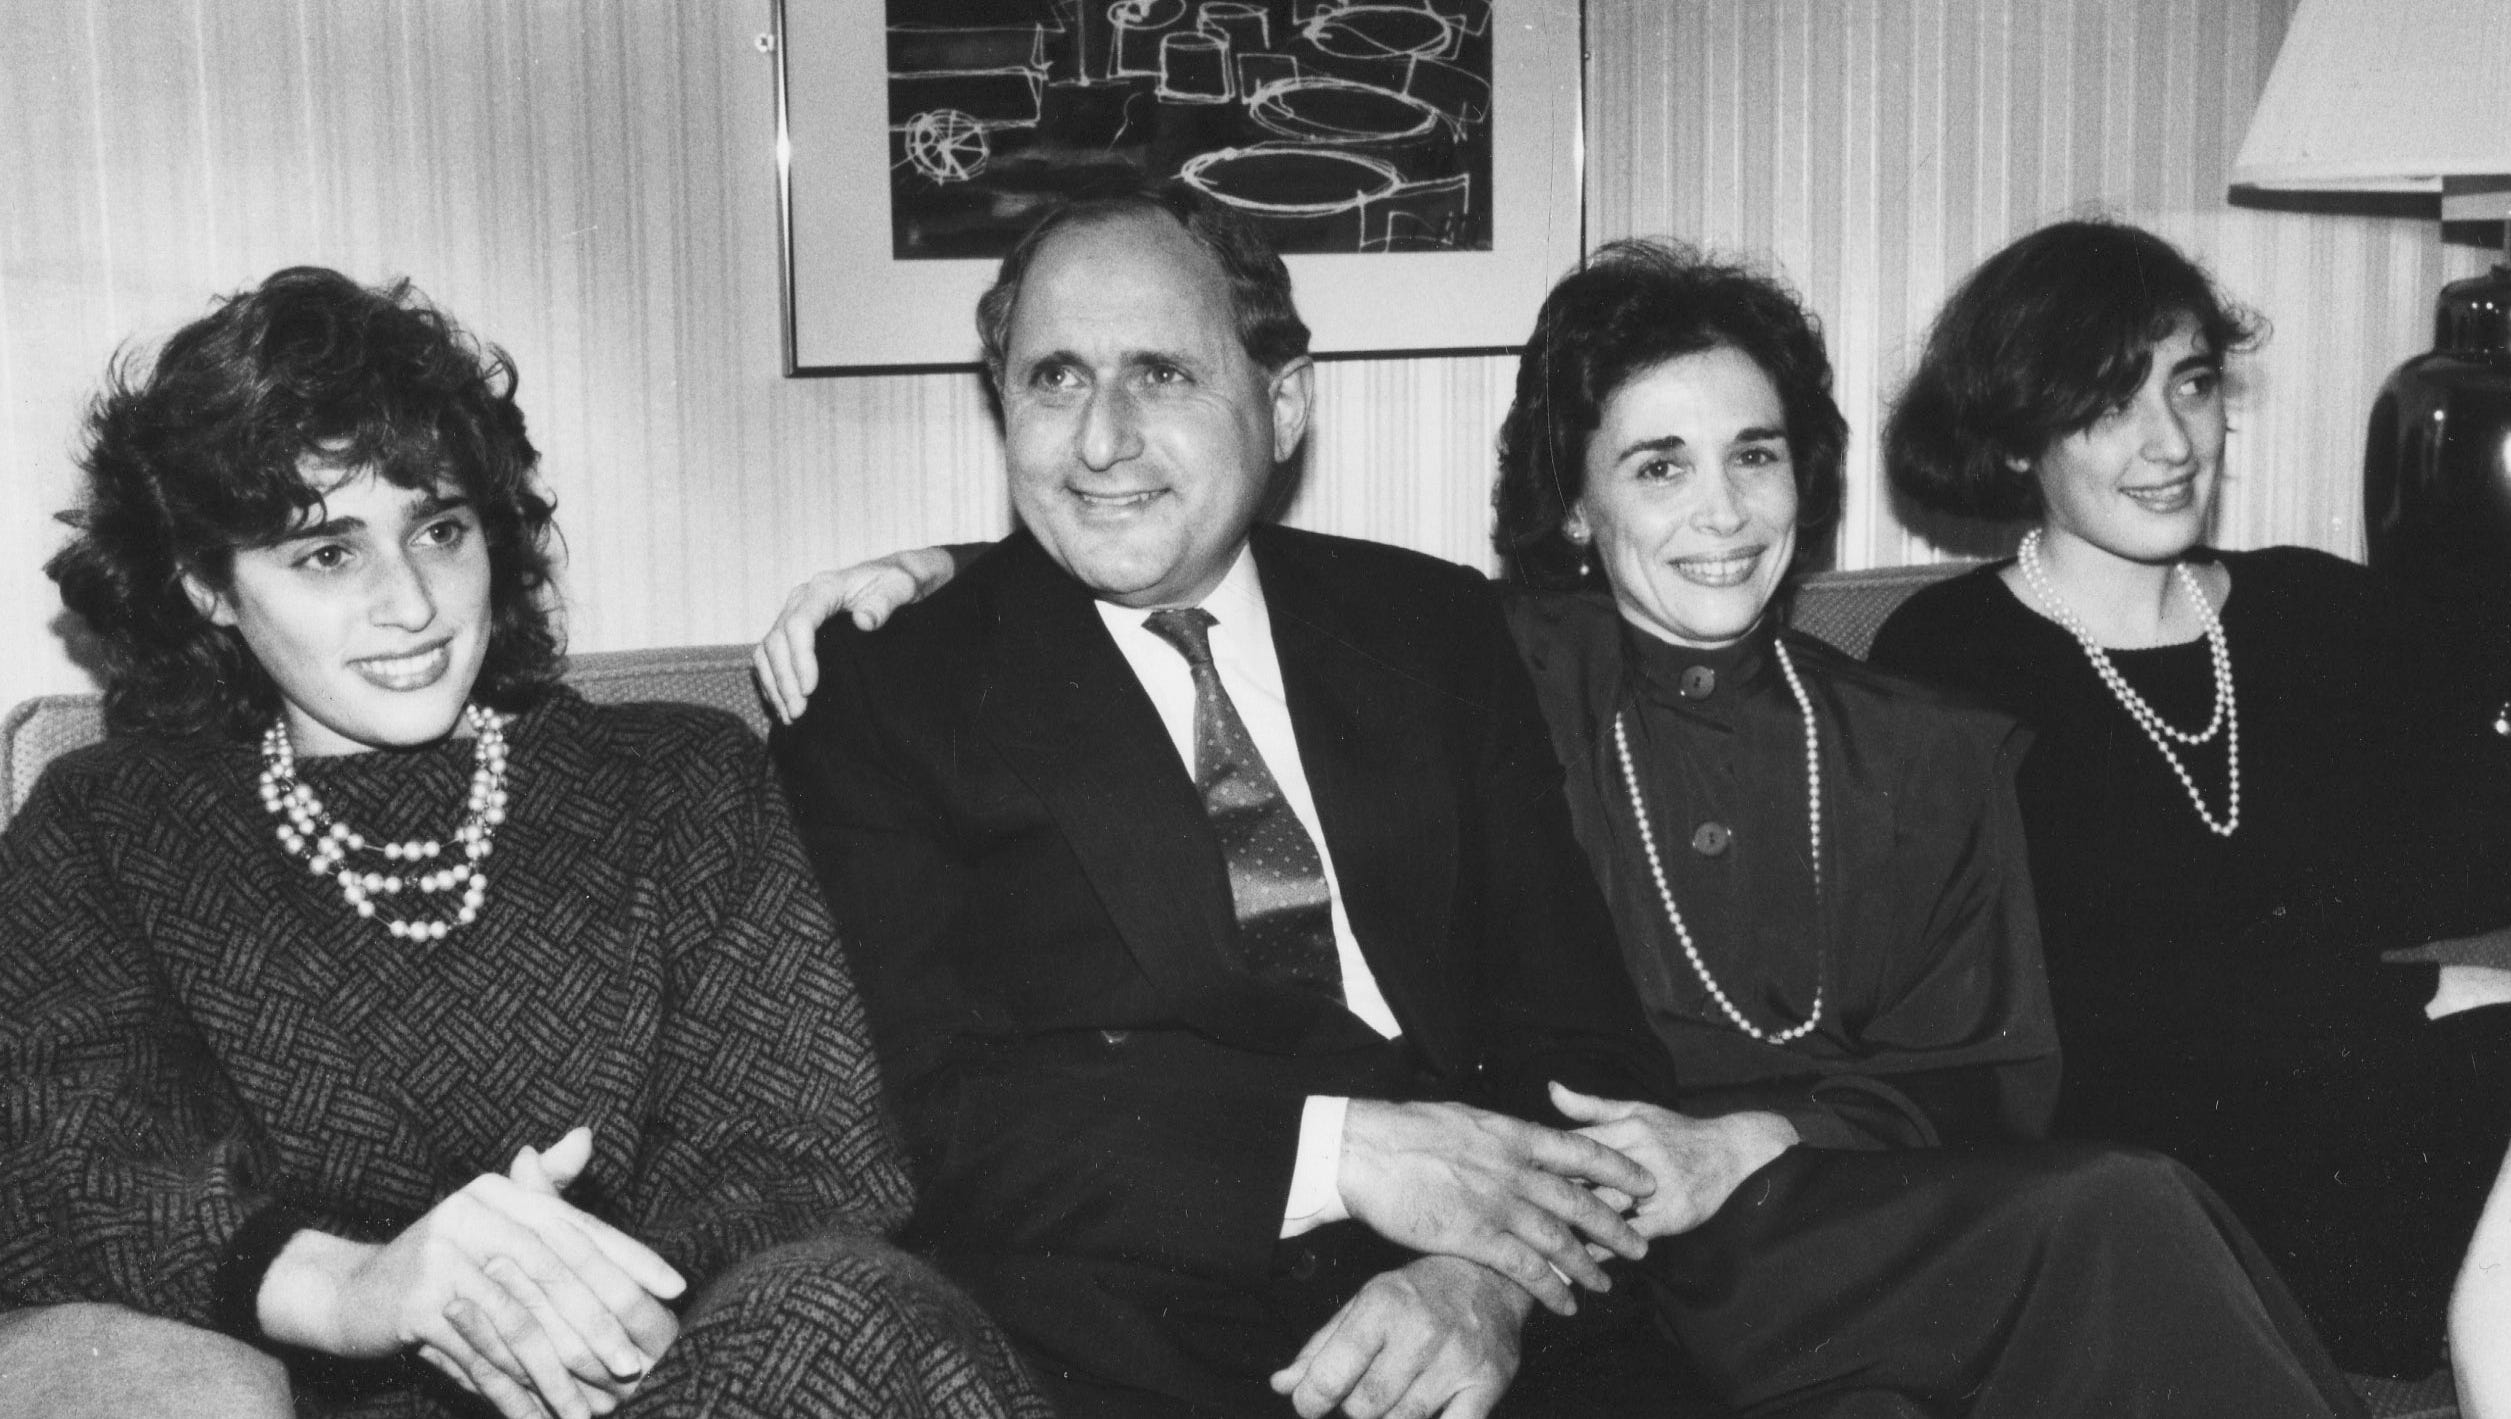 Carl Levin with his wife, Barbara, and daughters in November 1984.